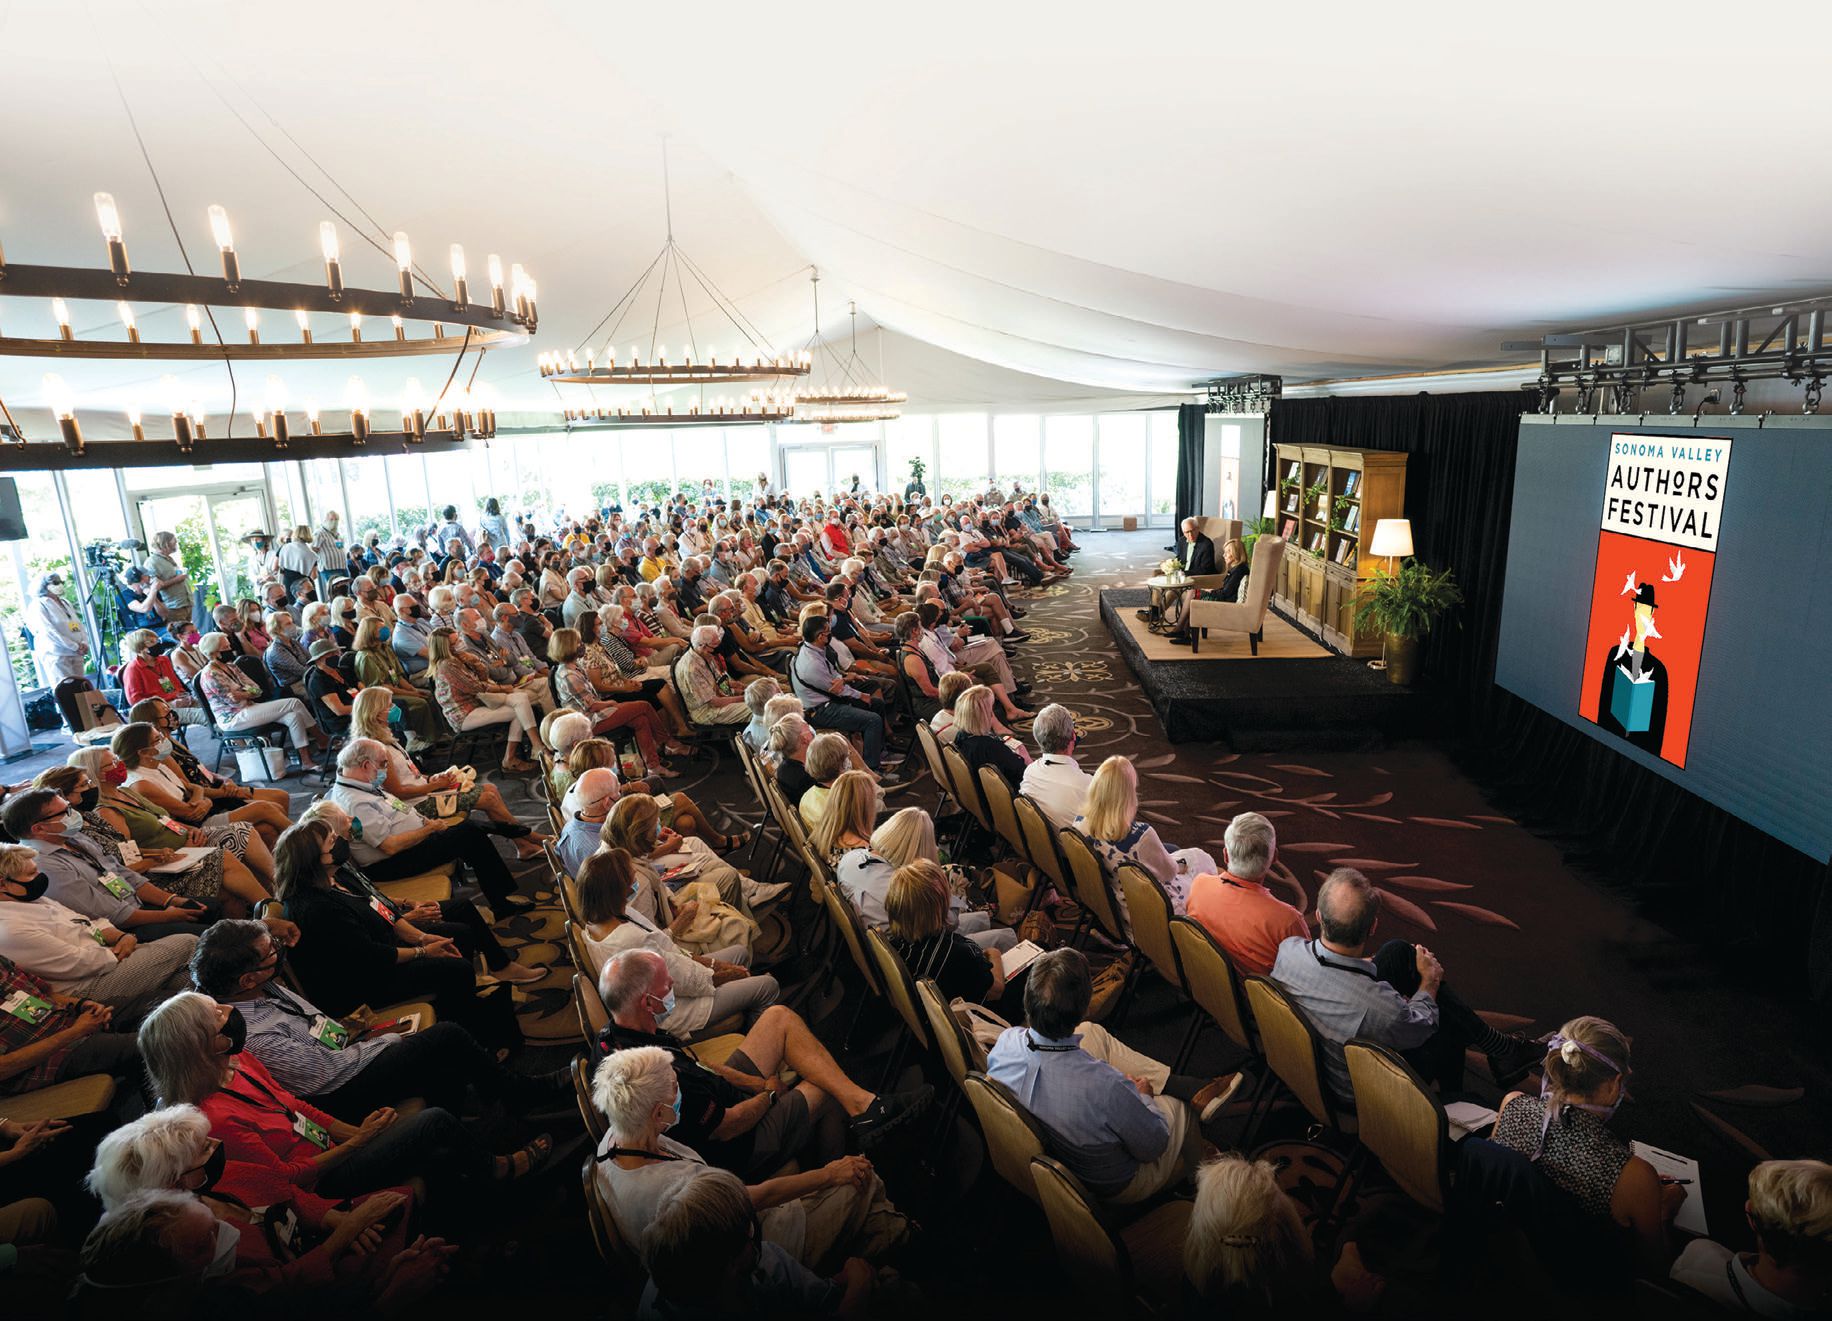 Expect an intimate and engaging setting for the Sonoma Valley Authors Festival. PHOTO COURTEY OF THE SONOMA VALLEY AUTHORS FESTIVAL